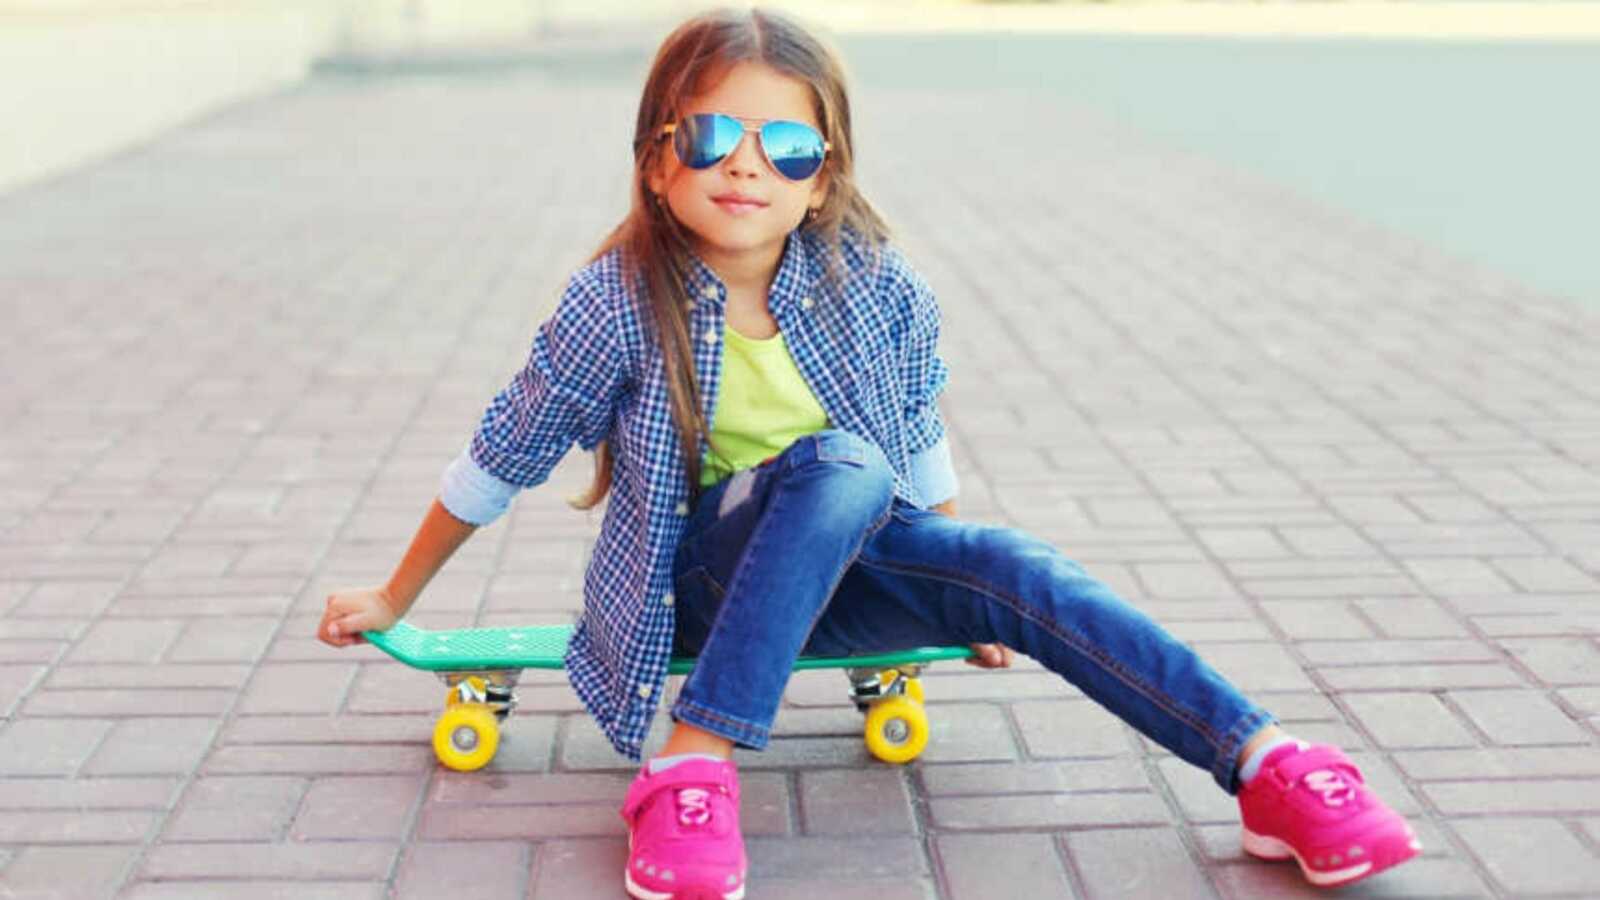 girl with sunglasses sitting on skateboard